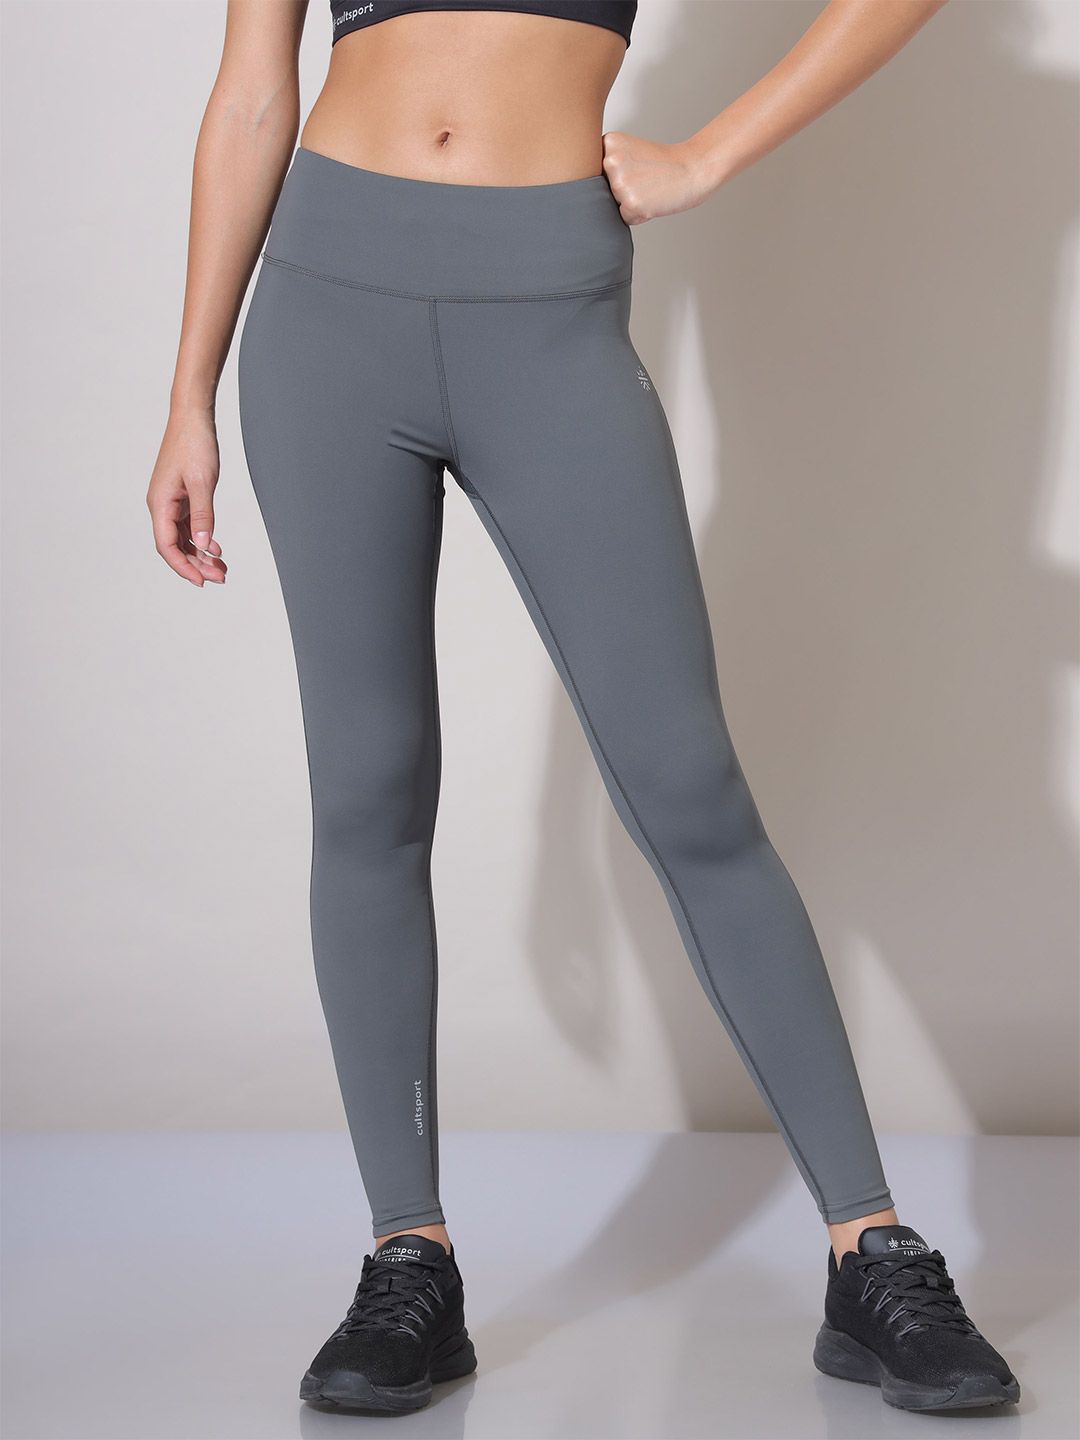 Cultsport Women Grey Solid Rapid-Dry Tights Price in India